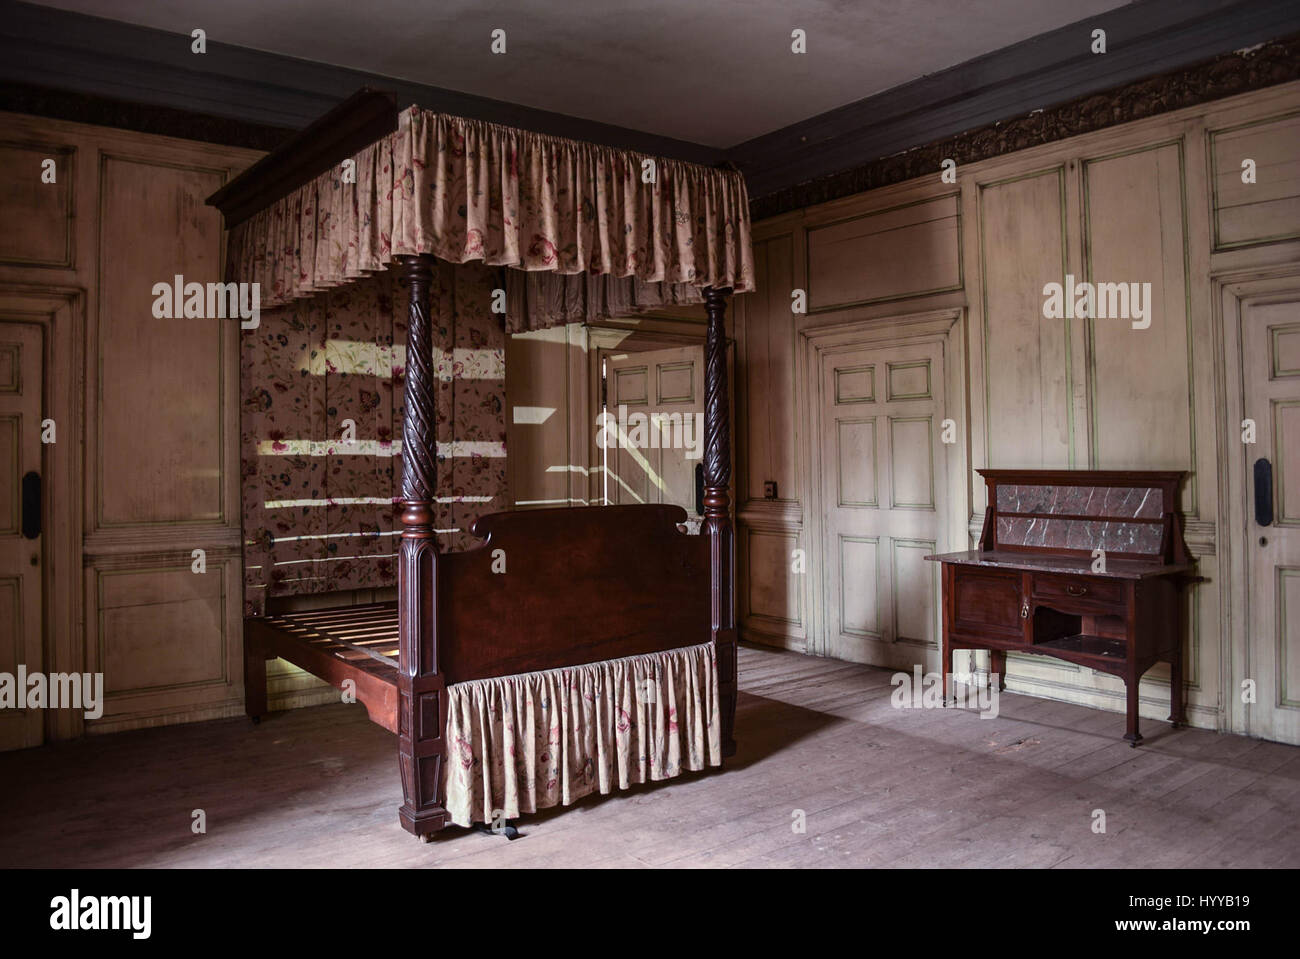 SCOTLAND, UNITED KINGDOM: STUNNING pictures offer a glimpse inside the decrepit Scottish mansion where Bonnie Prince Charlie once made his headquarters now on the open market for £1.25million despite efforts of a local trust to secure the historic building for the nation. The atmospheric images show the original four-poster bed that Prince Charles Edward Stuart slept in, and possibly sired his only daughter on, chipped banisters and a neglected snooker table with vintage scoreboard.  Other photos show a corridor of what would have been servants’ rooms and what looks like a utility room. The ho Stock Photo